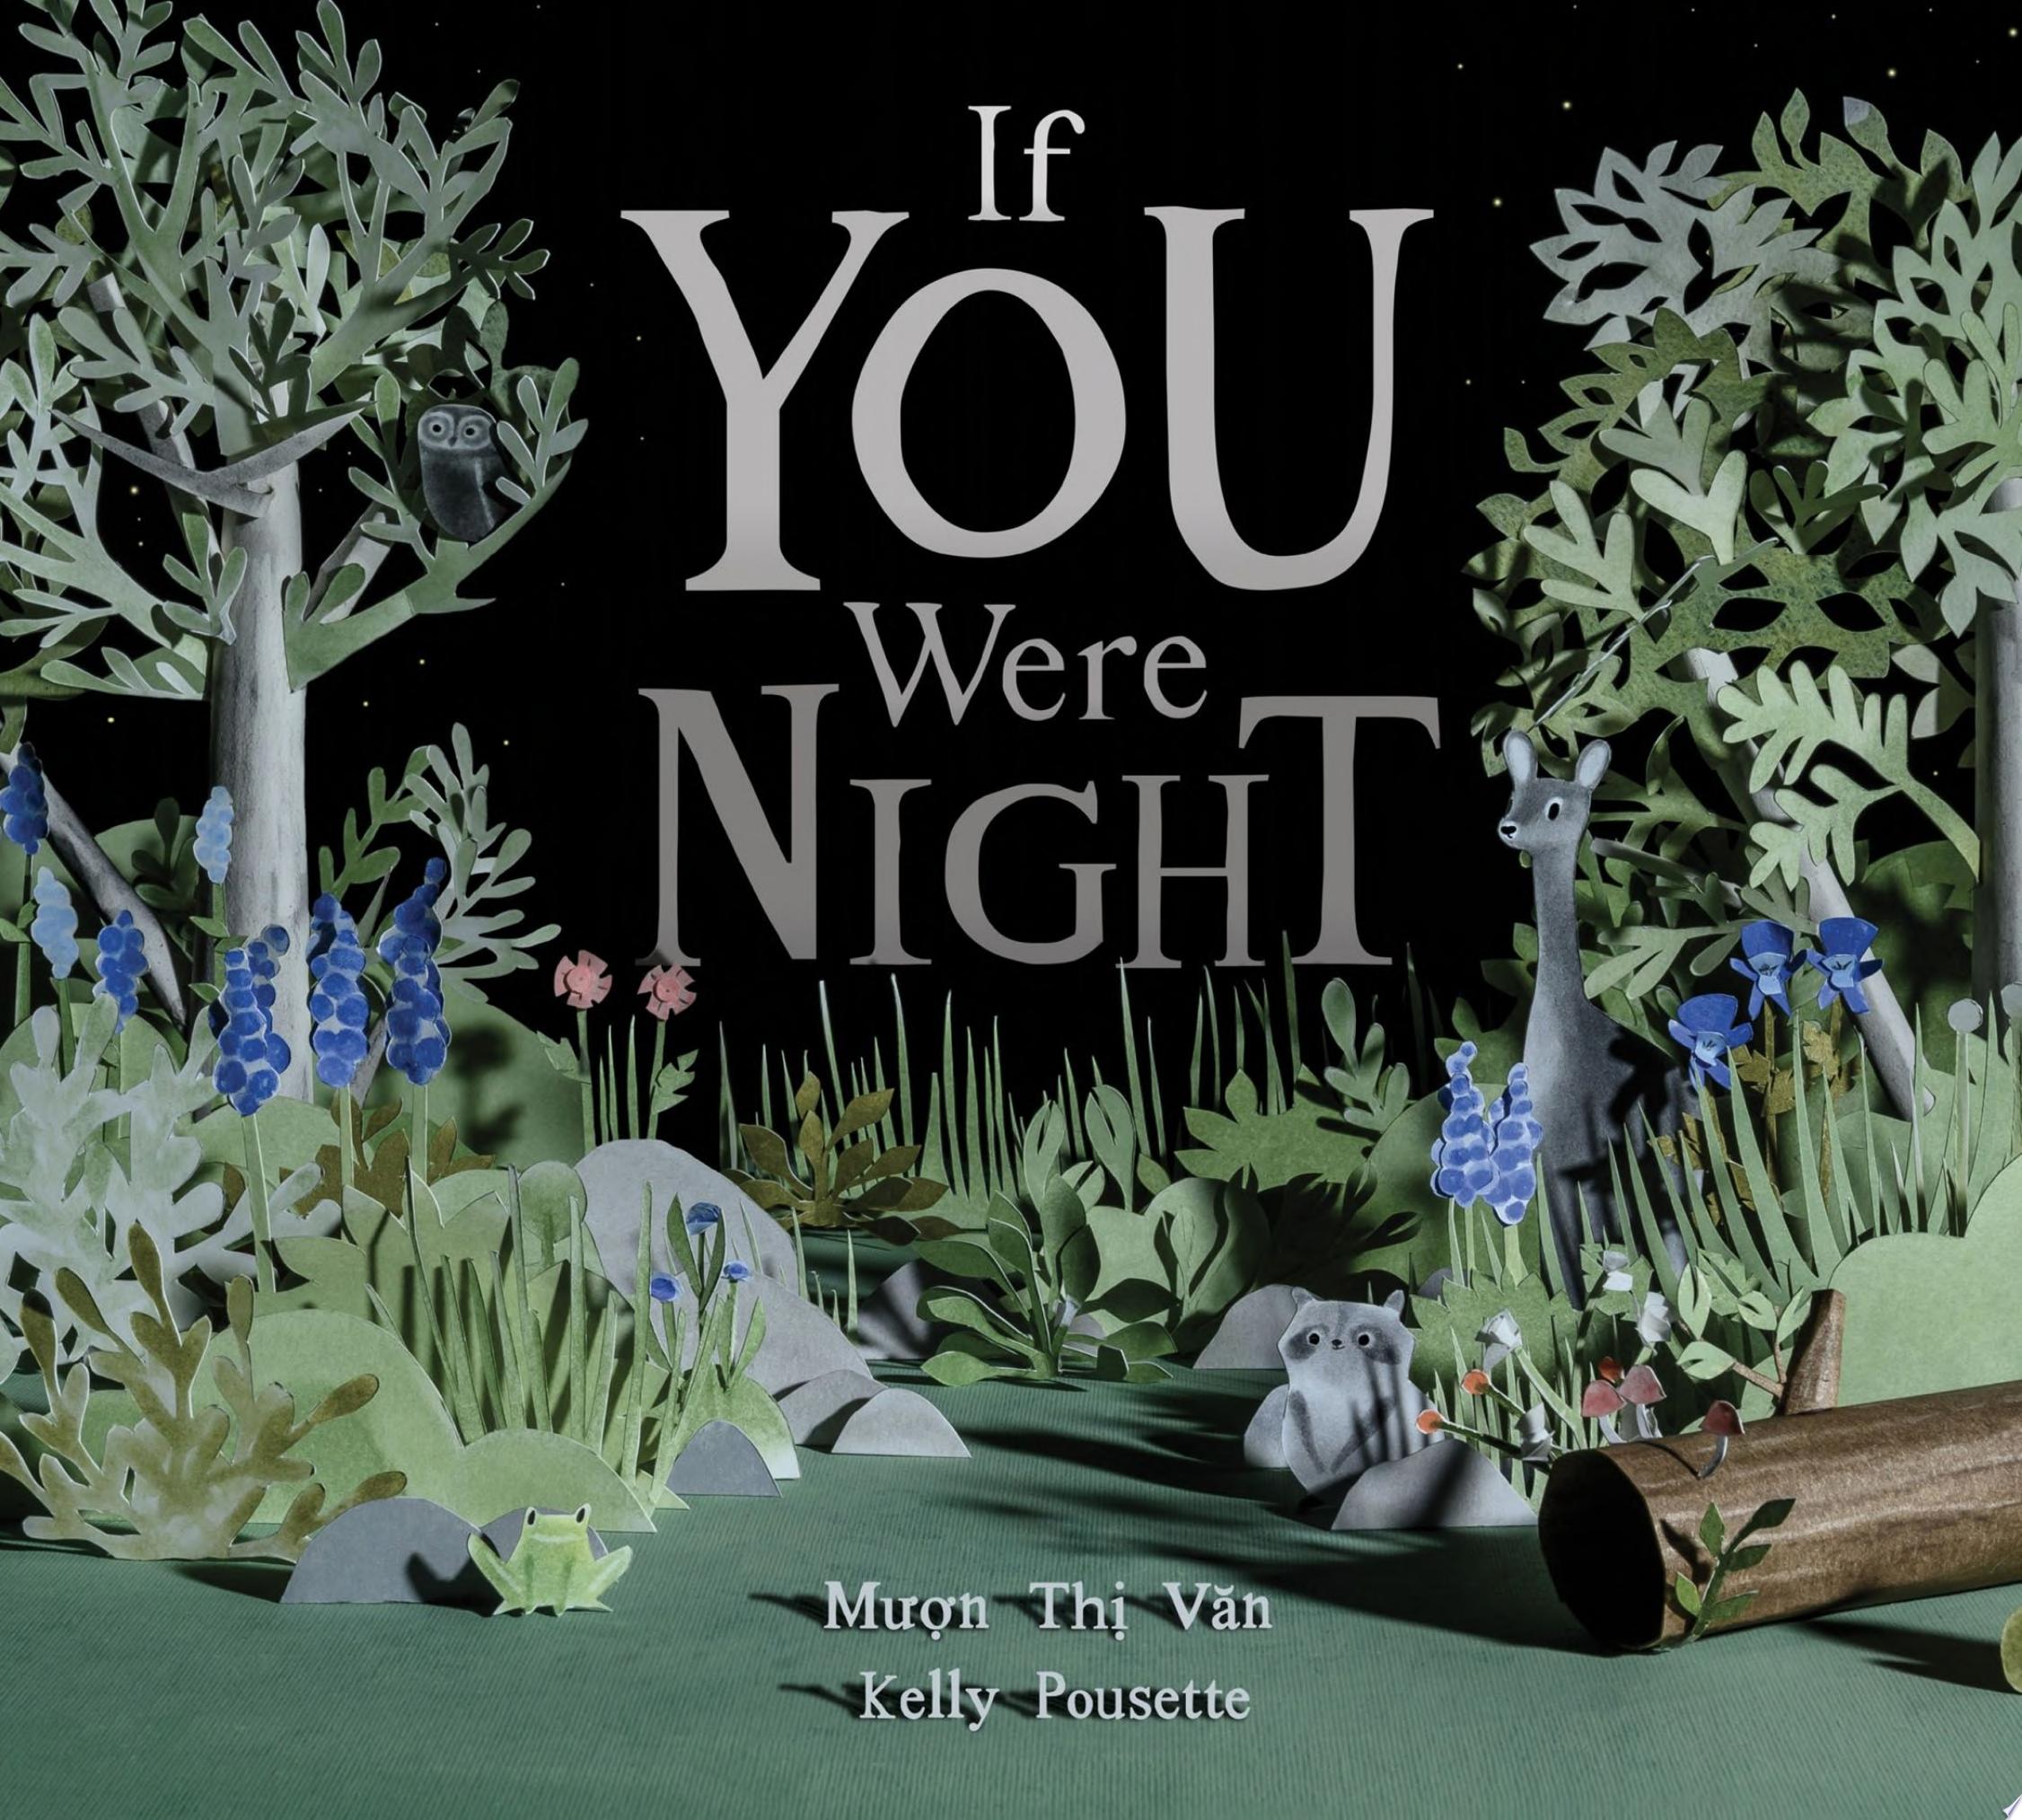 Image for "If You Were Night"